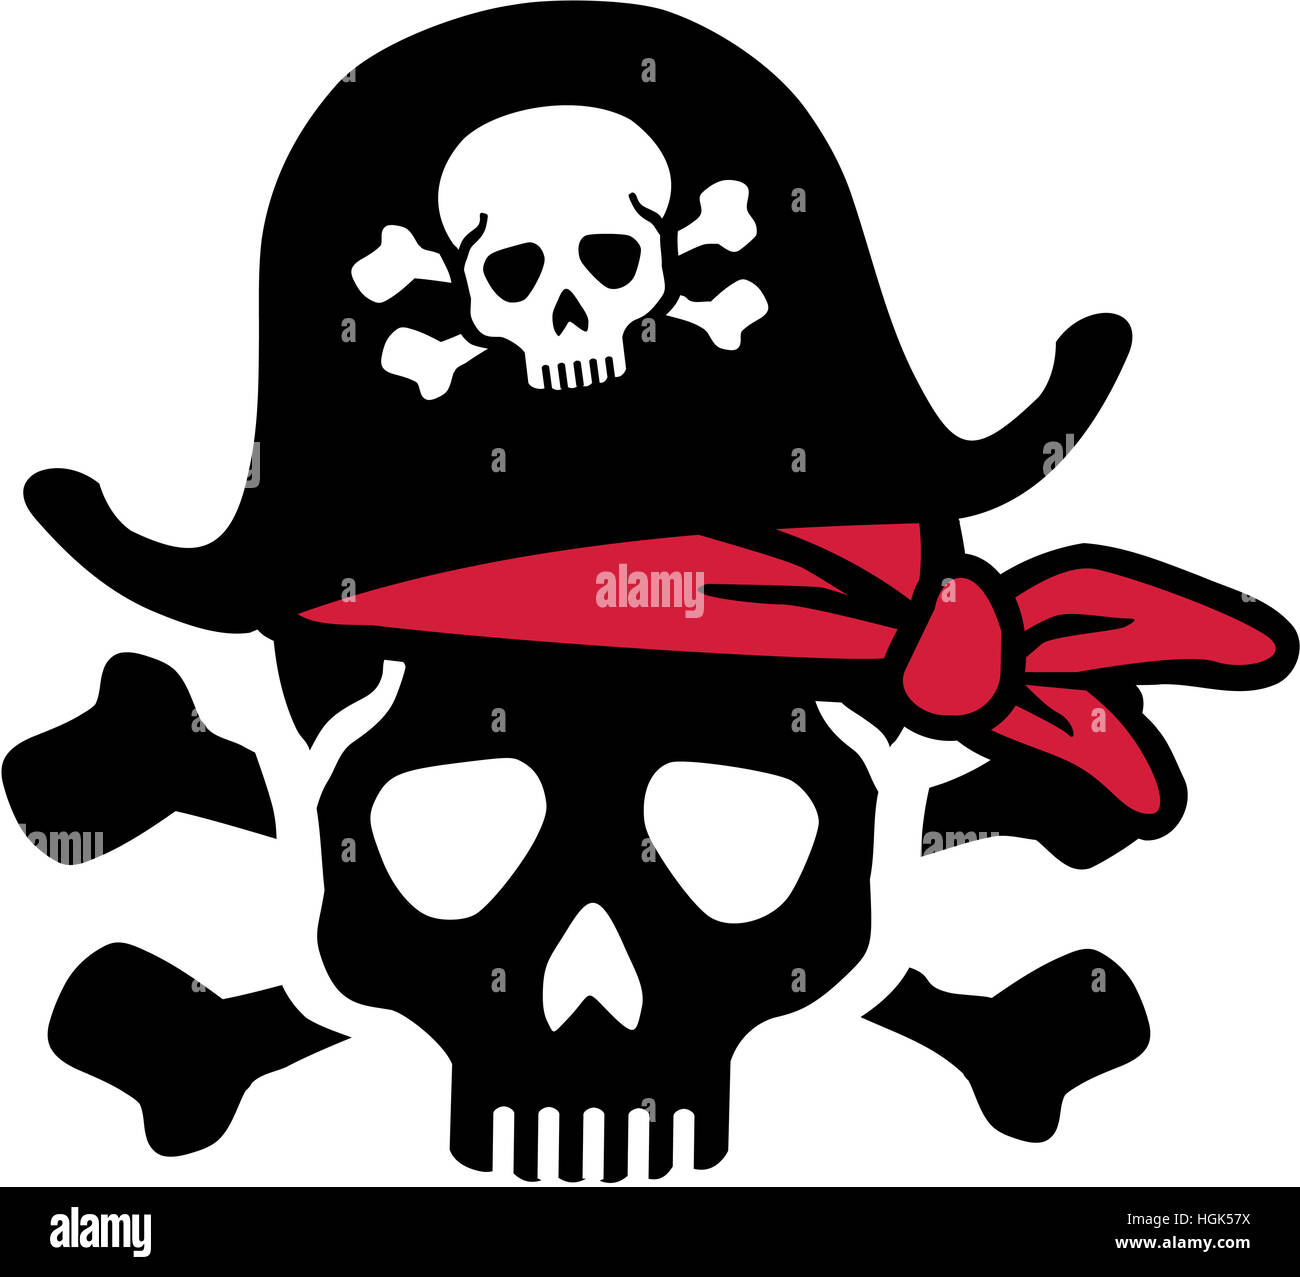 Pirate skull with bones and red headscarf Stock Photo